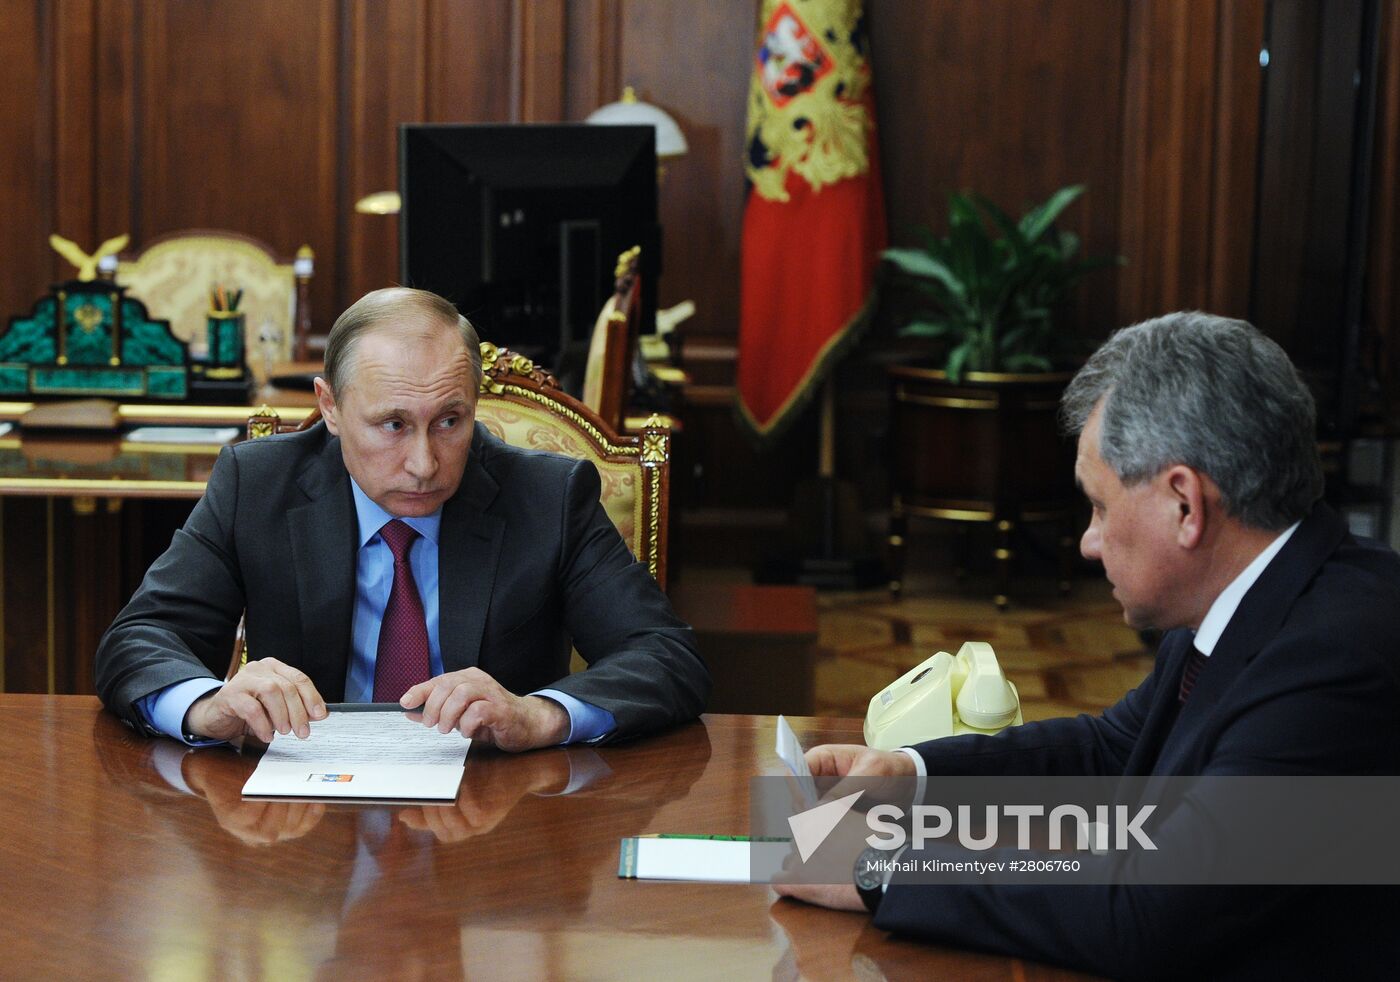 Russian President Vladimir Putin meets with Foreign Minister Sergey Lavrov and Defense Minister Sergey Shoygu